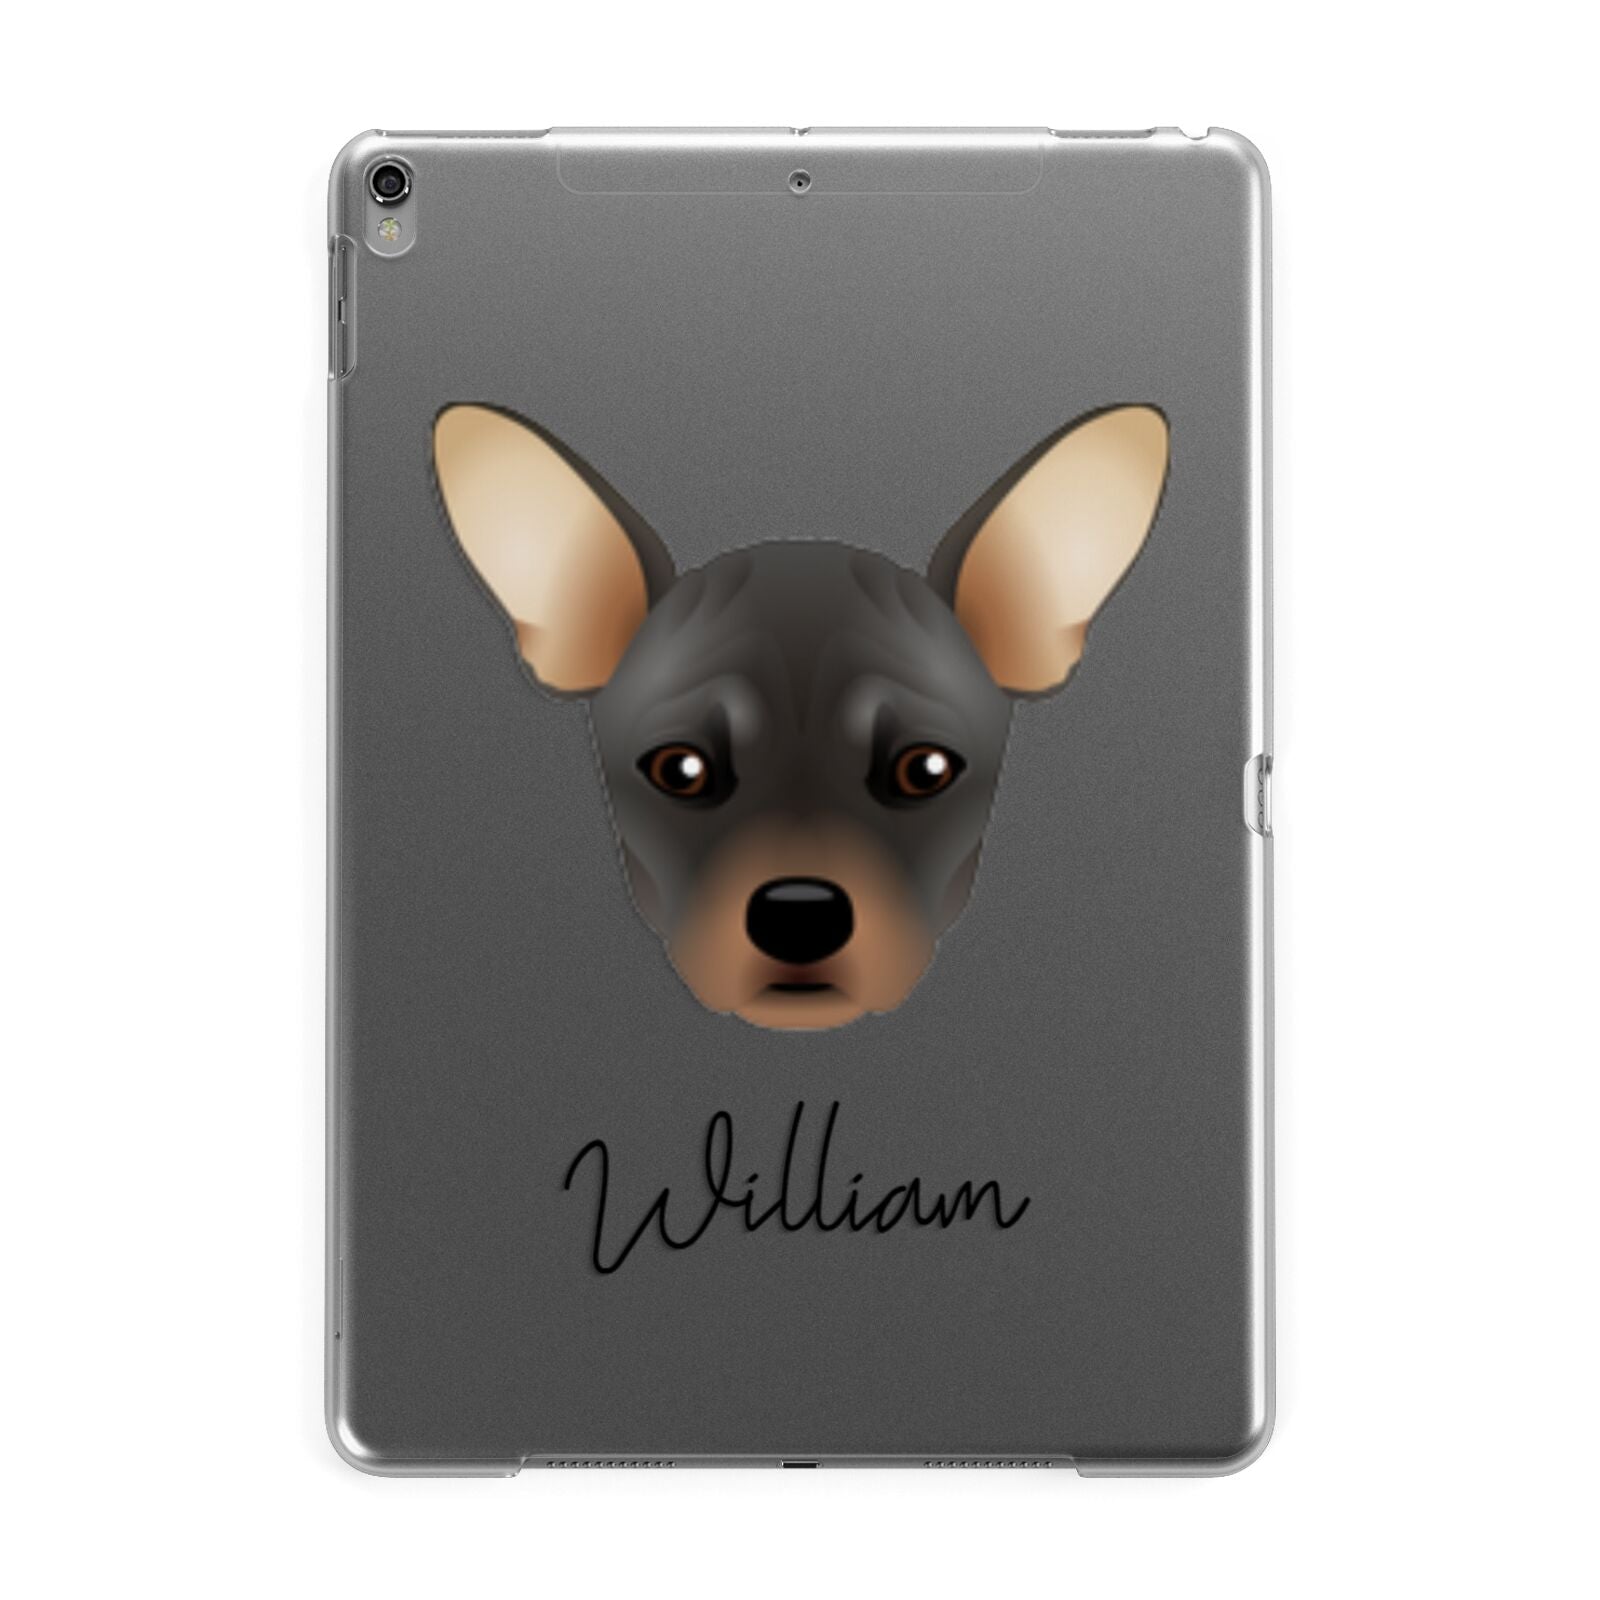 French Pin Personalised Apple iPad Grey Case